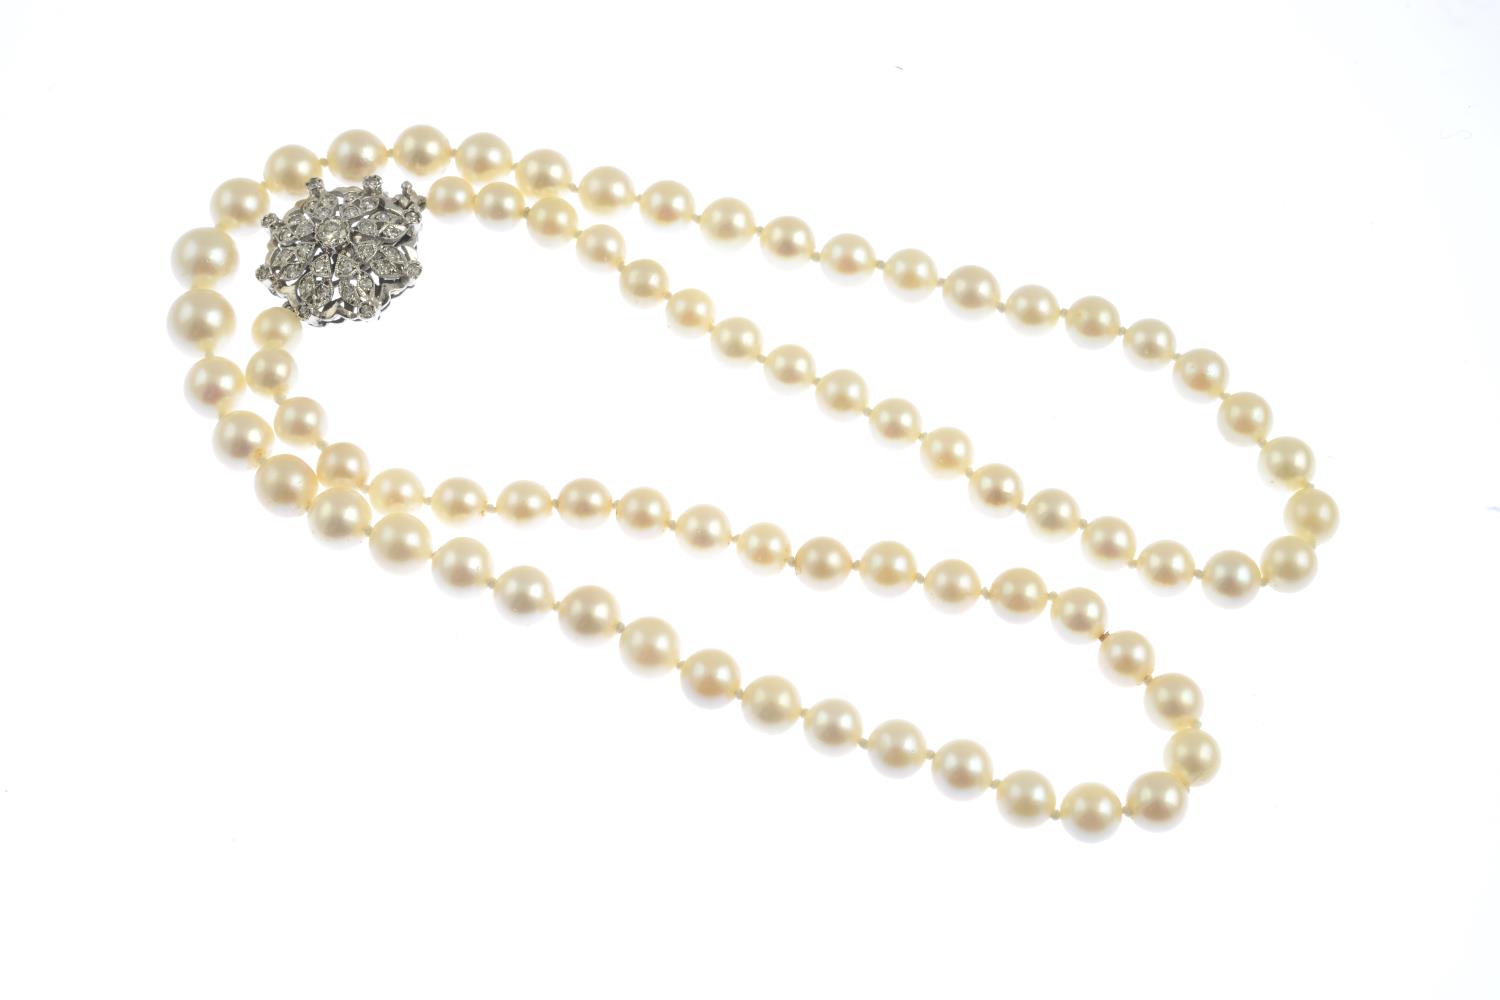 A cultured pearl necklace with diamond clasp.Approximate diameter of cultured pearls 7 to 9.5mms. - Image 2 of 2